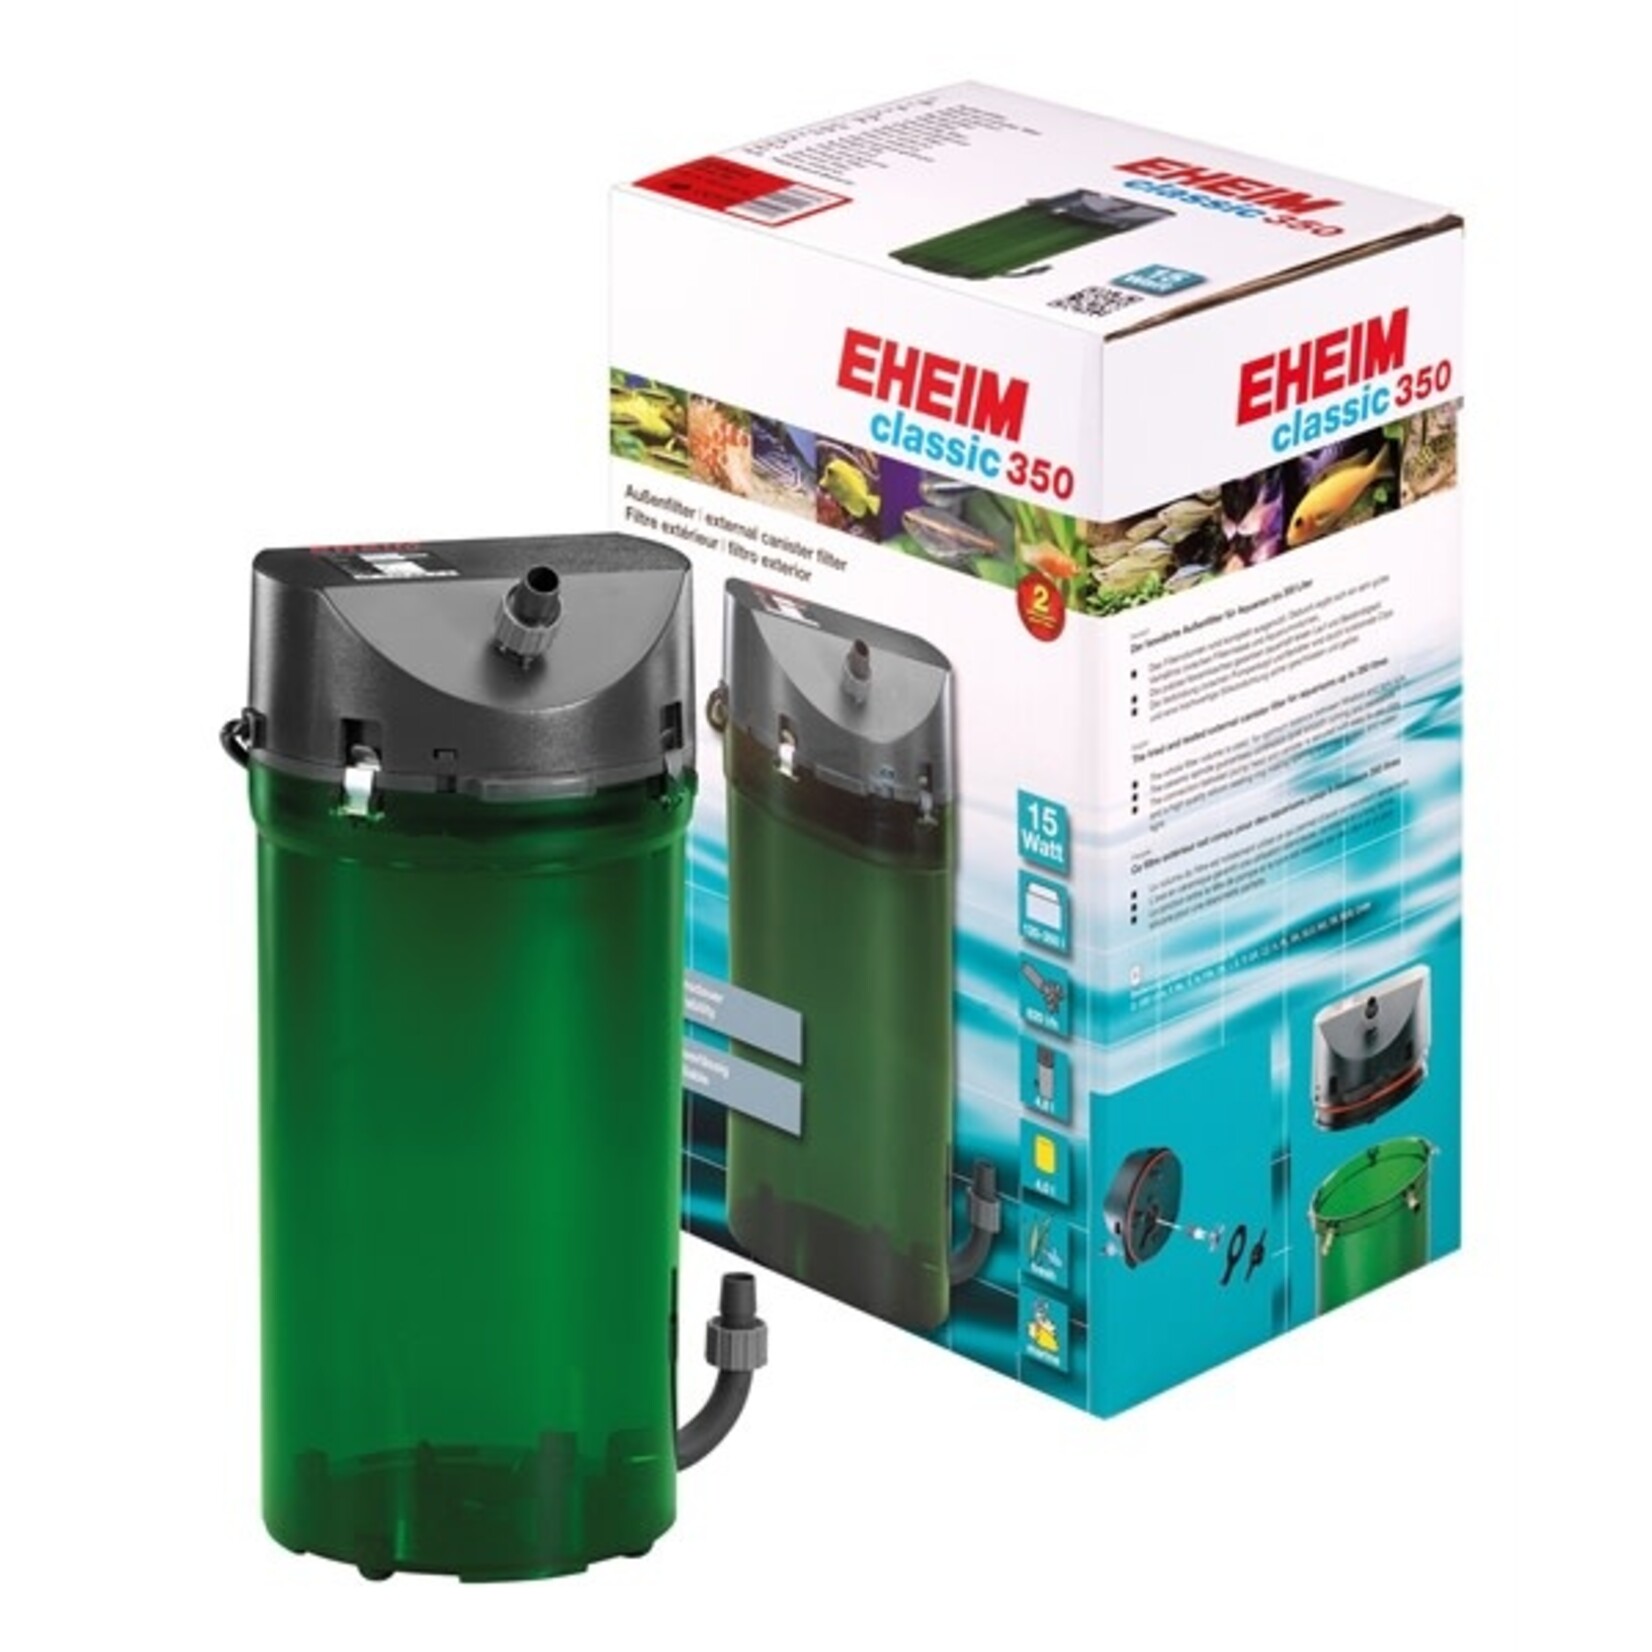 Eheim external filter classic 2215 with mass and double taps 620 l/h